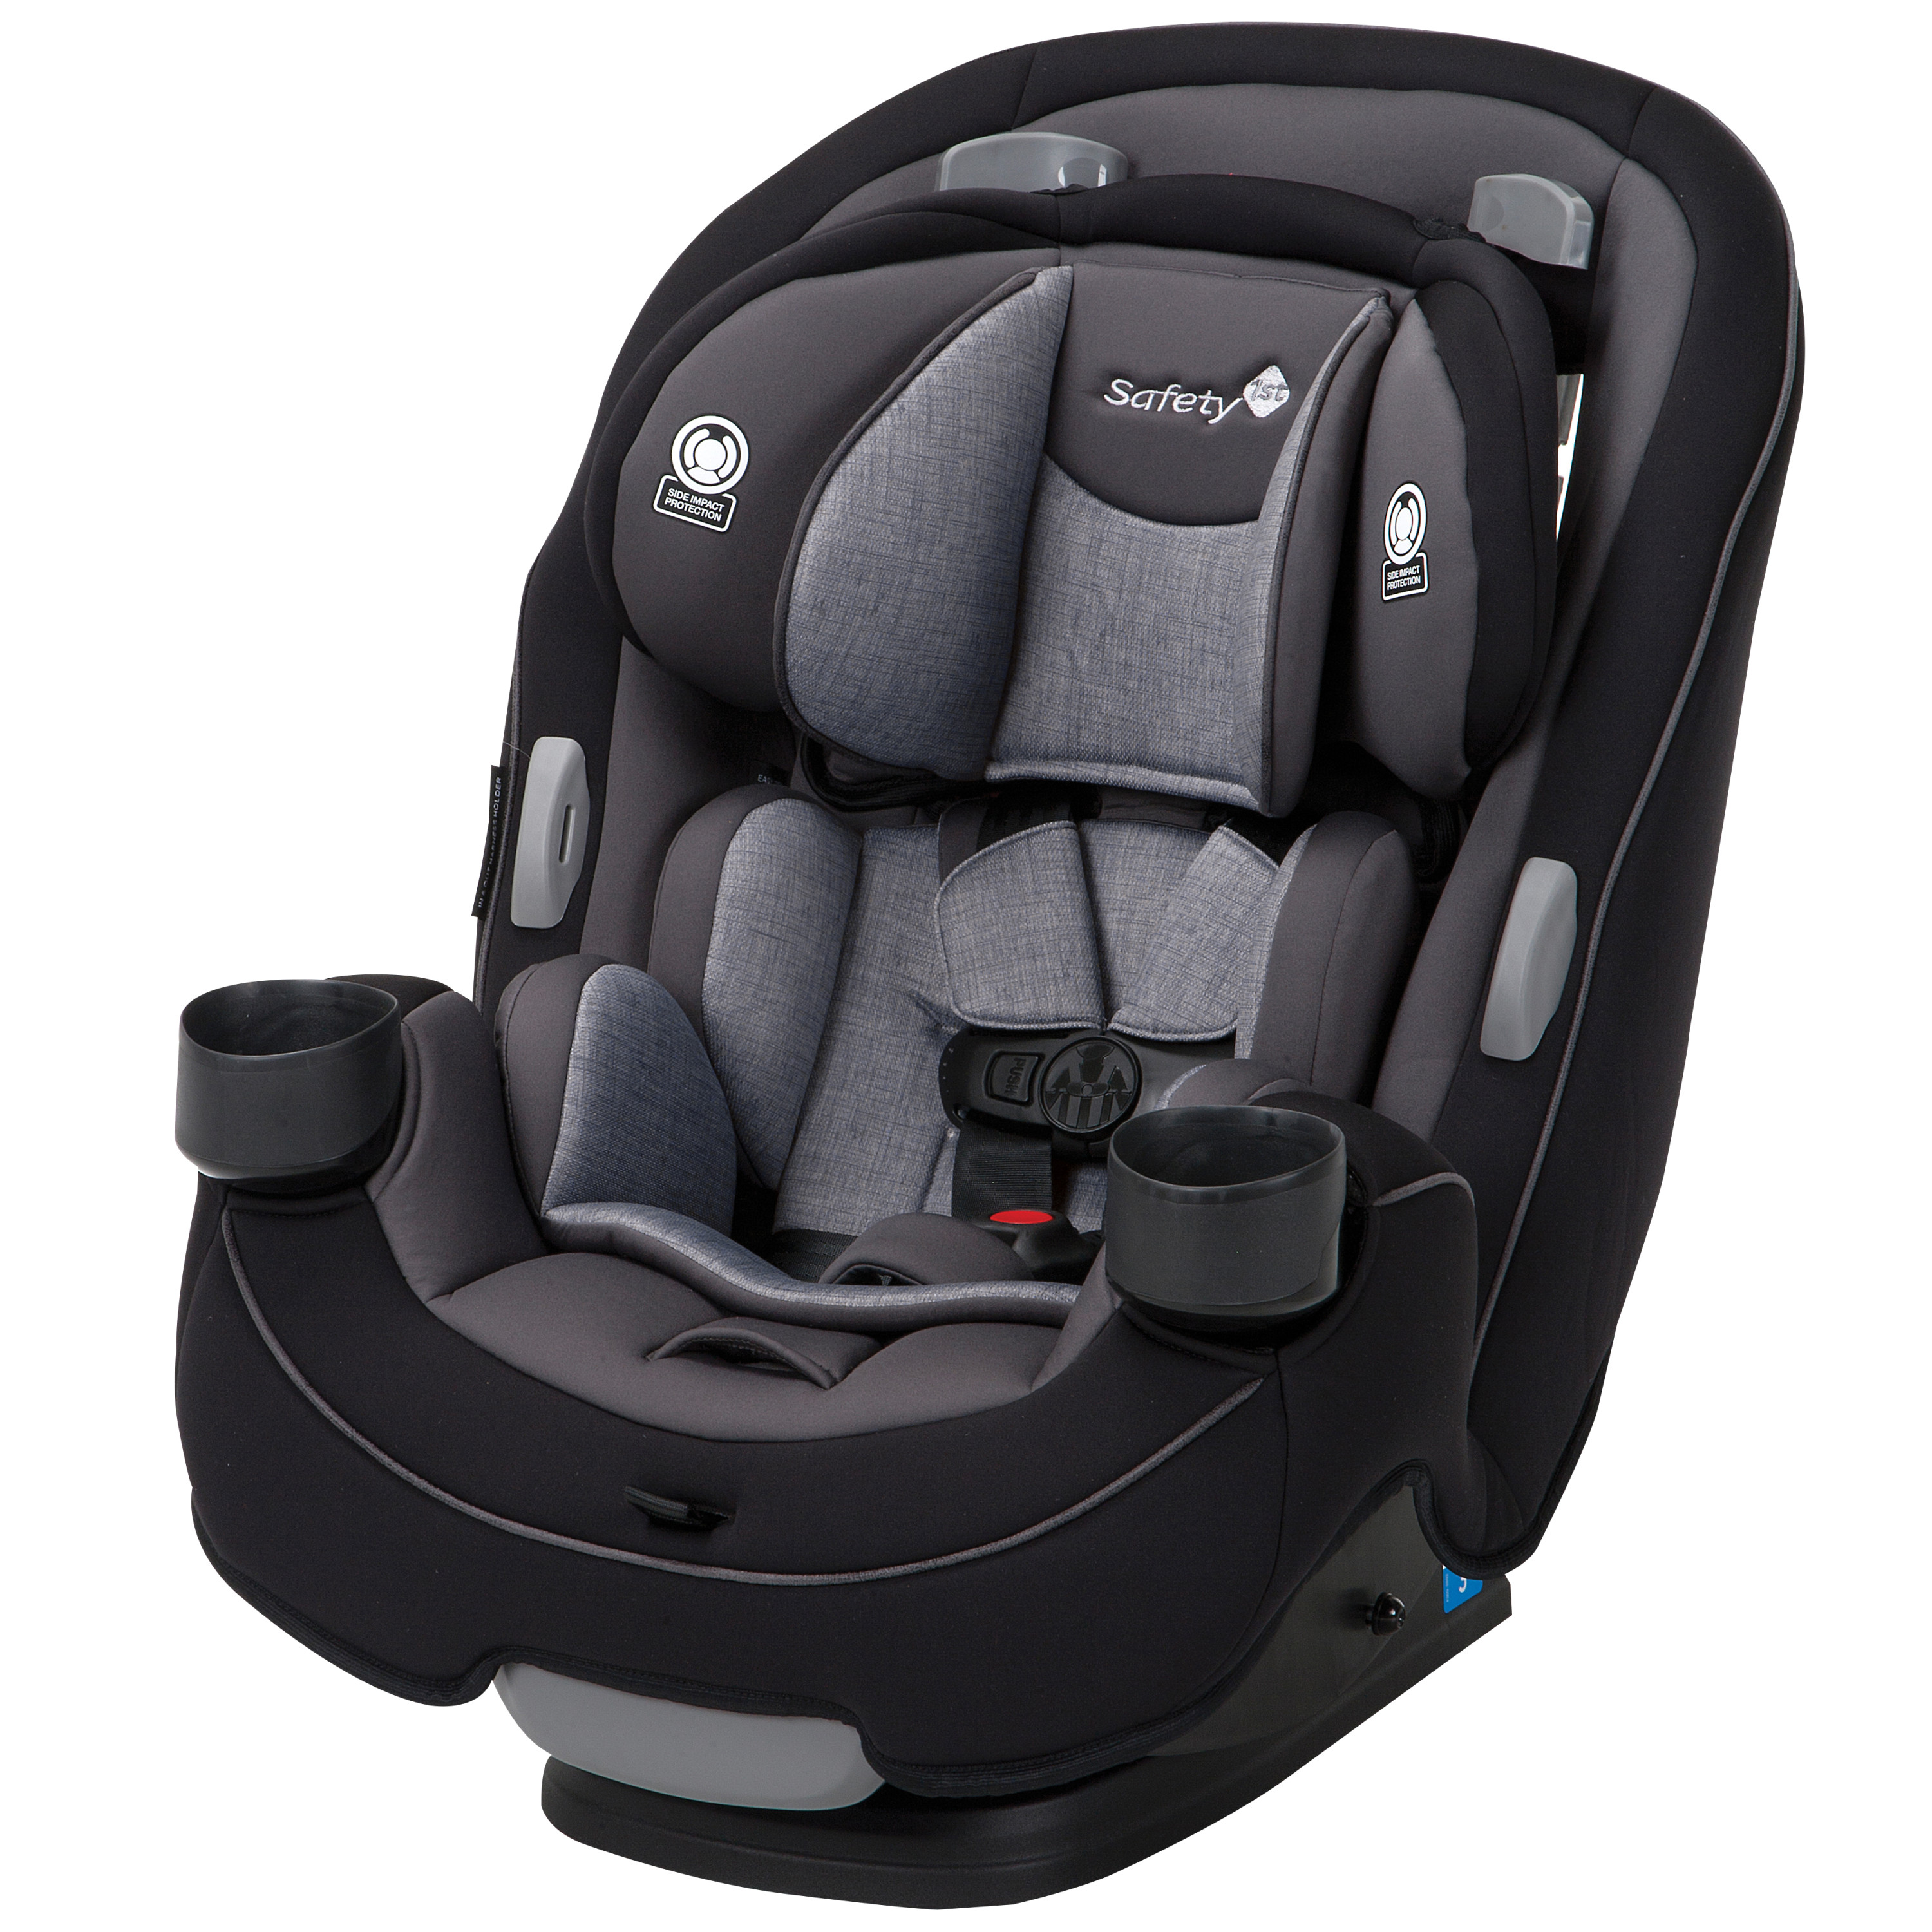 Safety 1st Grow and Go 3-in-1 Convertible